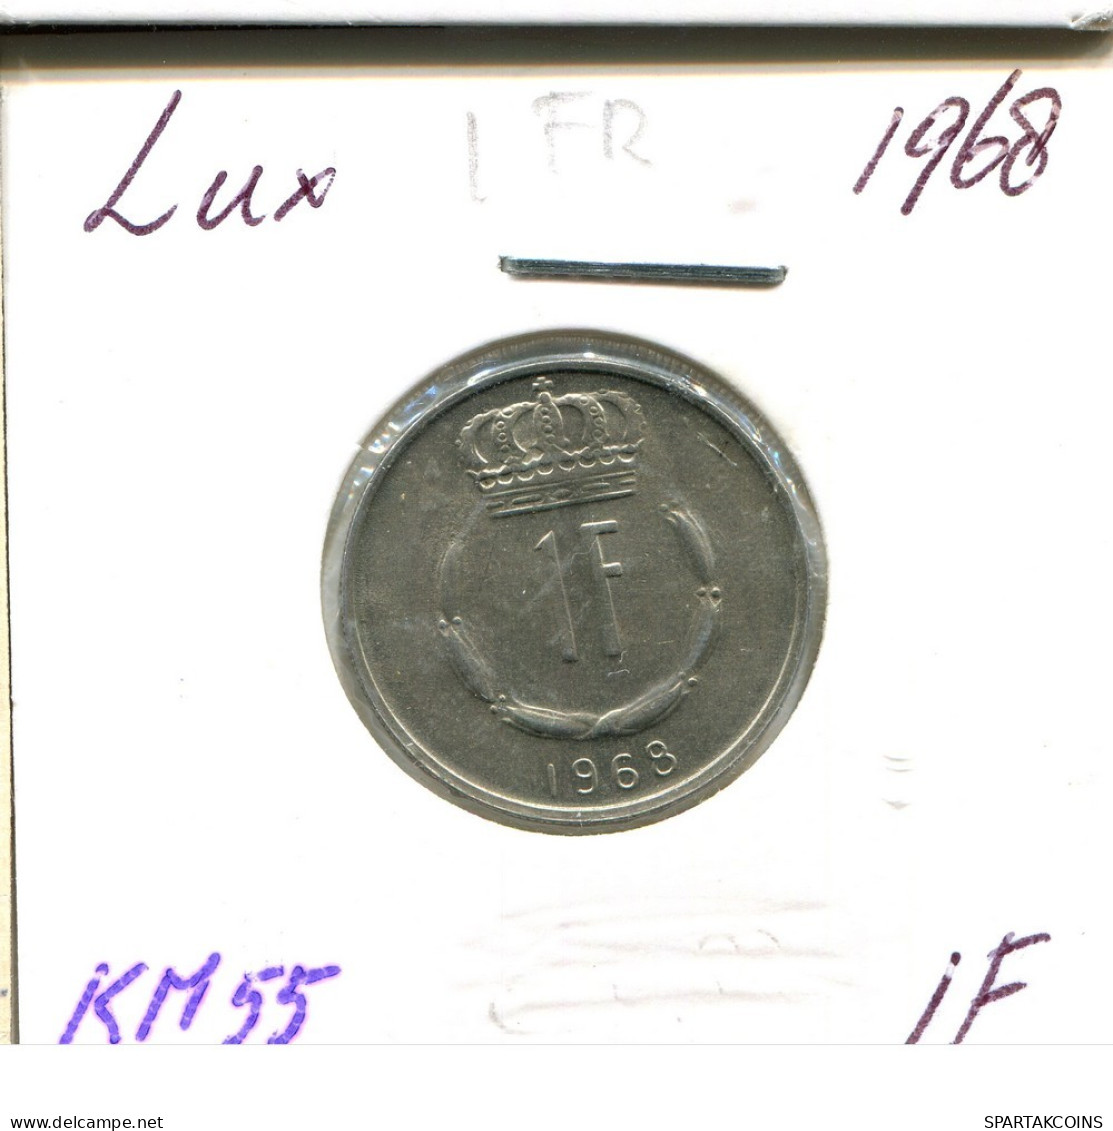 1 FRANC 1968 LUXEMBOURG Coin #AT208.U.A - Luxemburgo